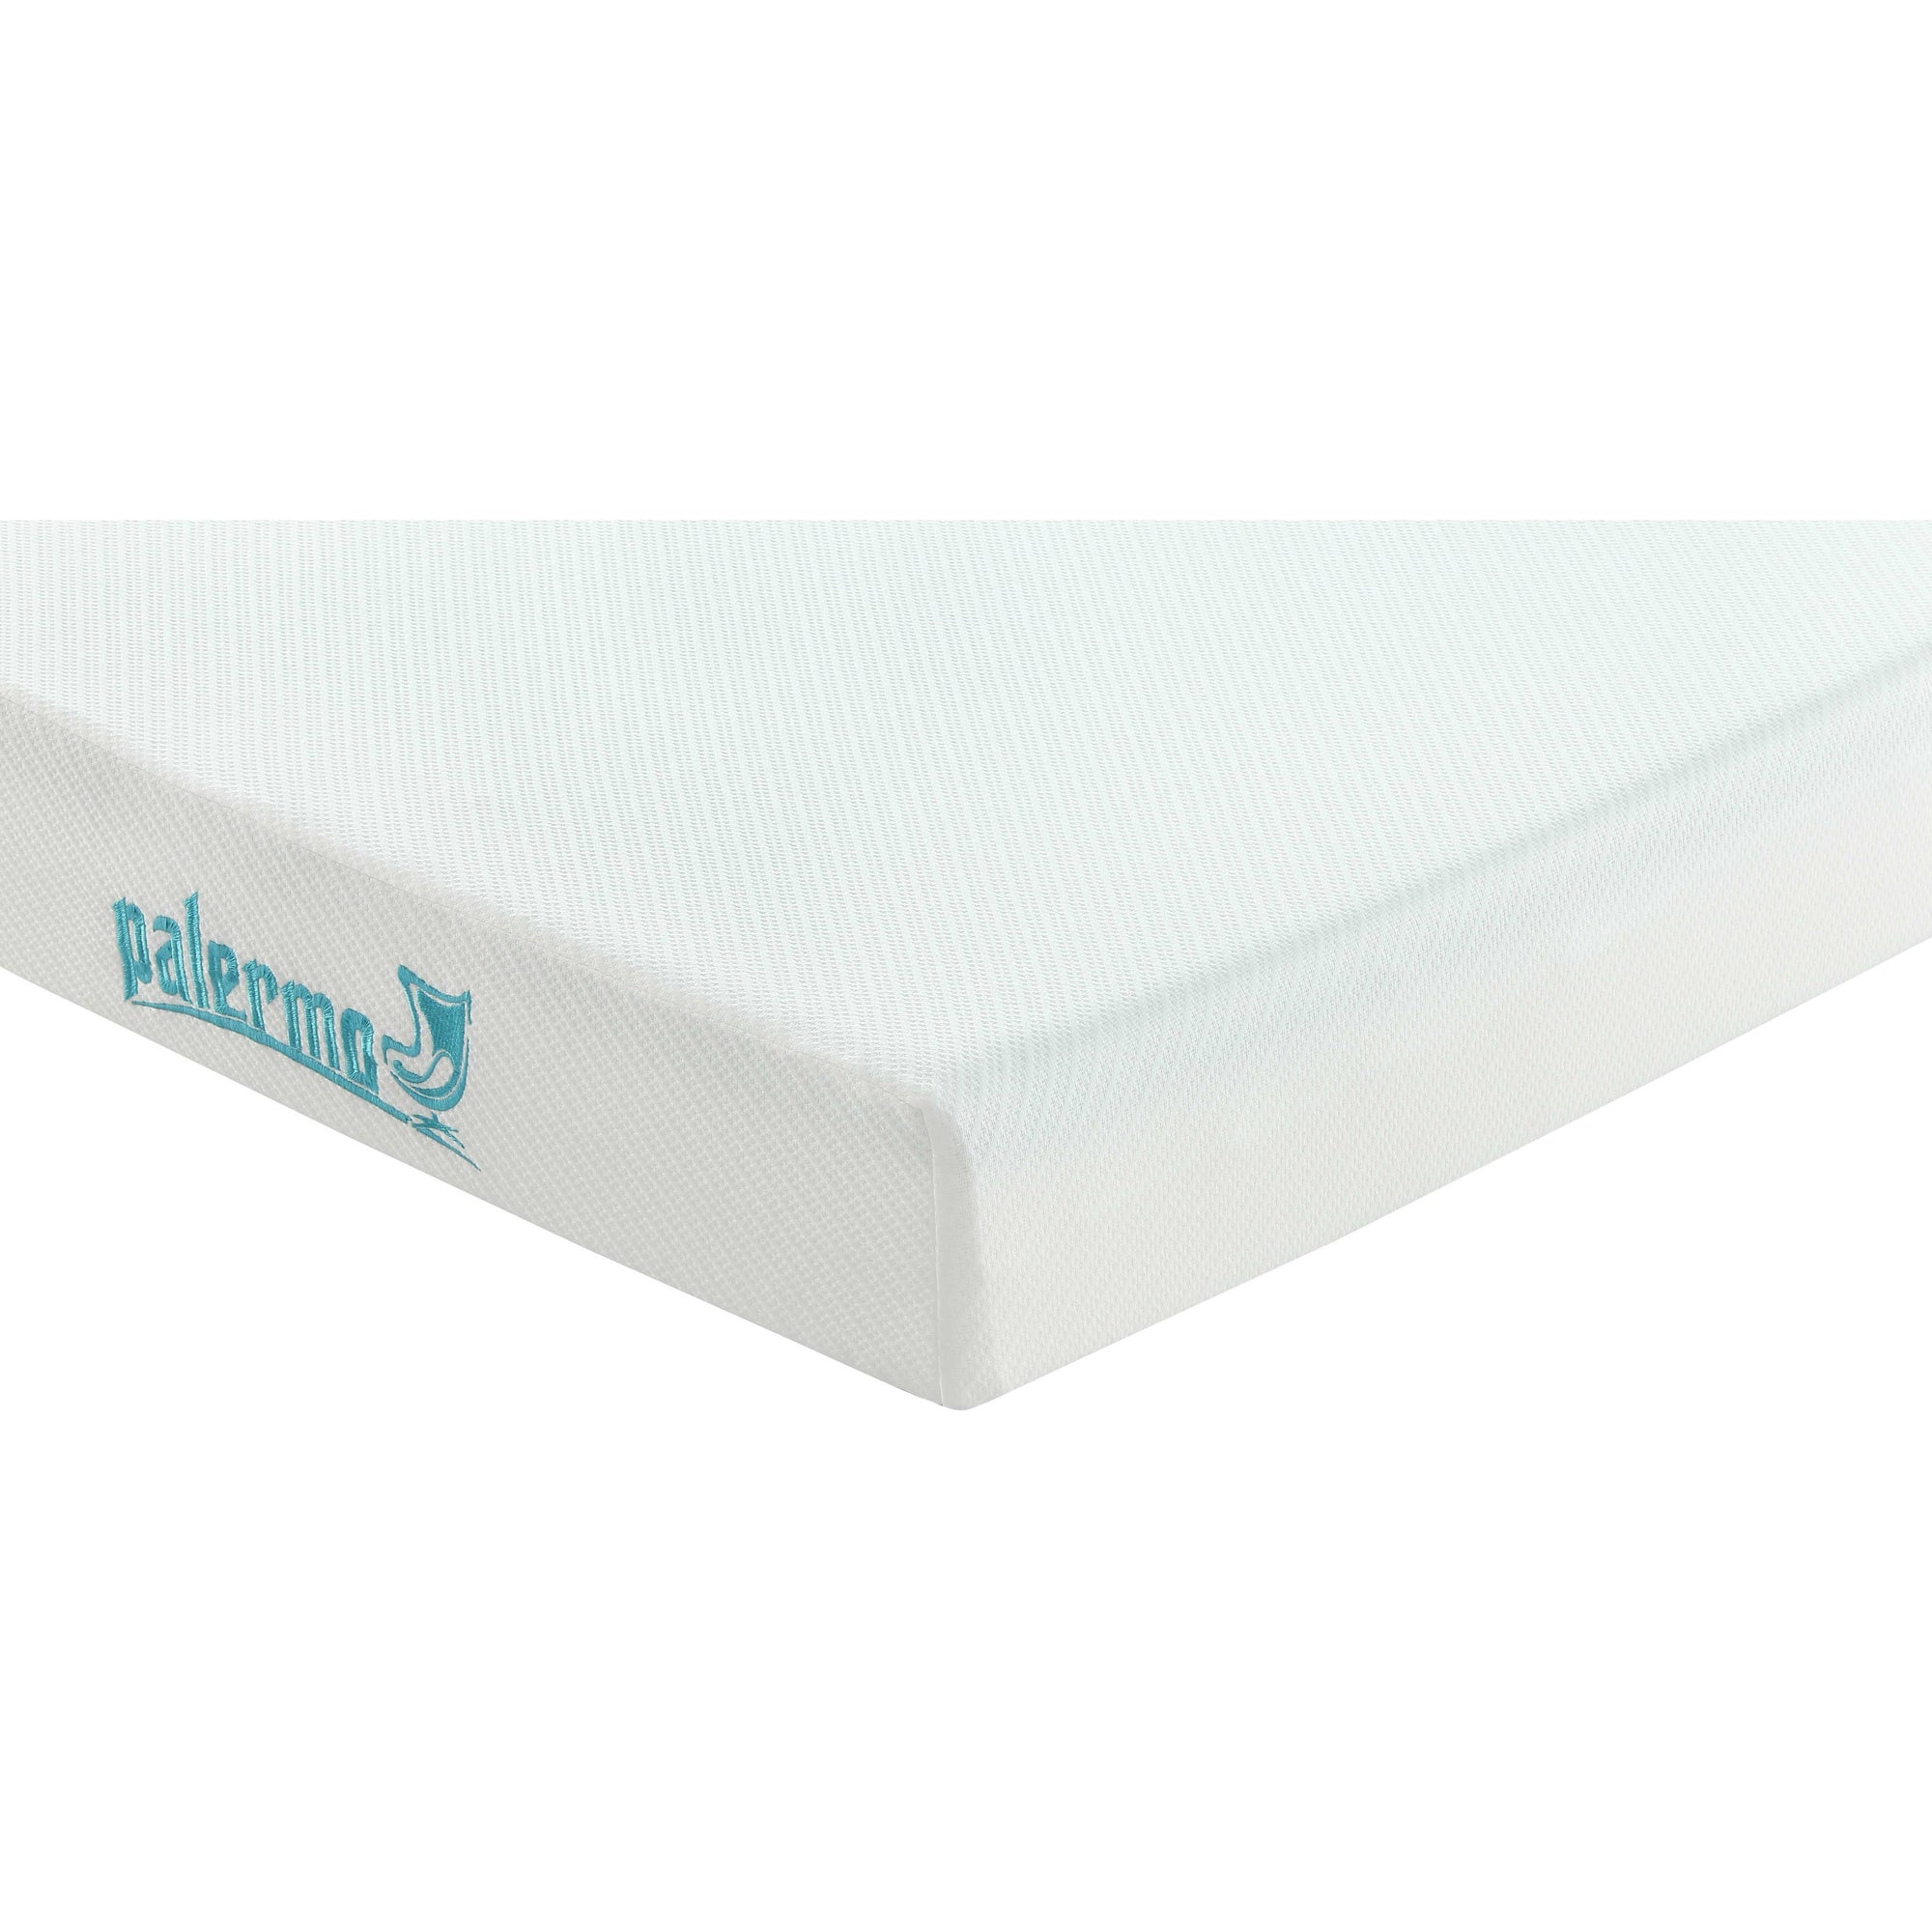 Palermo Double Mattress Memory Foam Green Tea Infused CertiPUR Approved